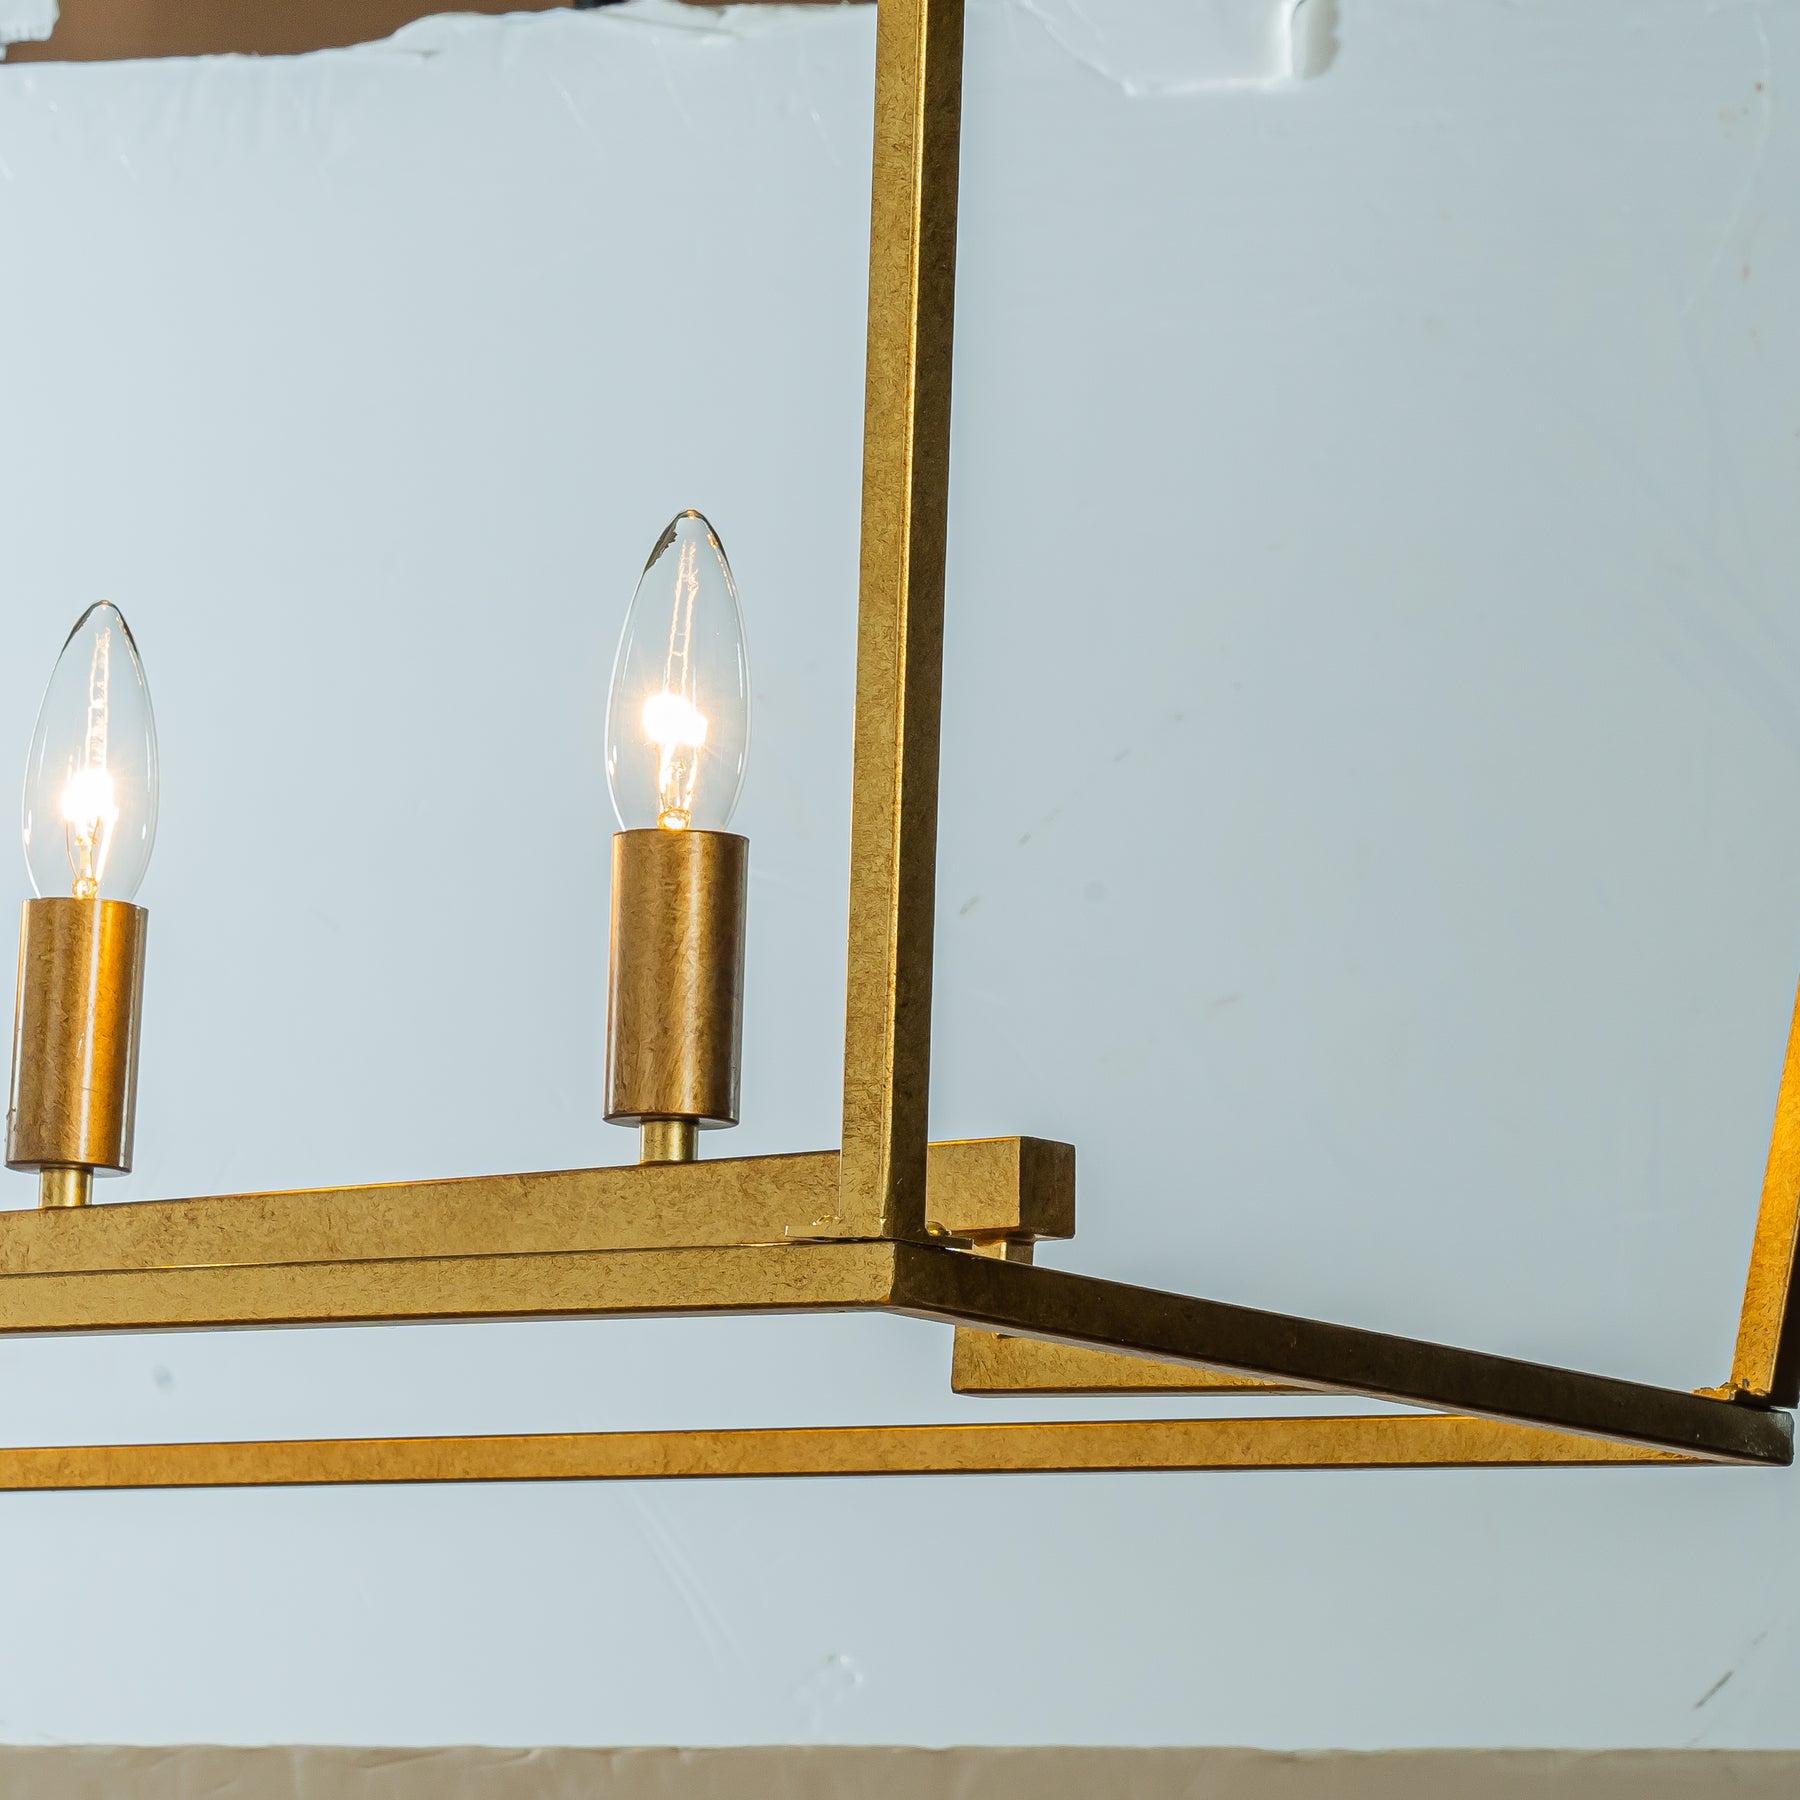 Farmhouse Linear Industrial Candlestick Cage Chandelier in Matte Gold